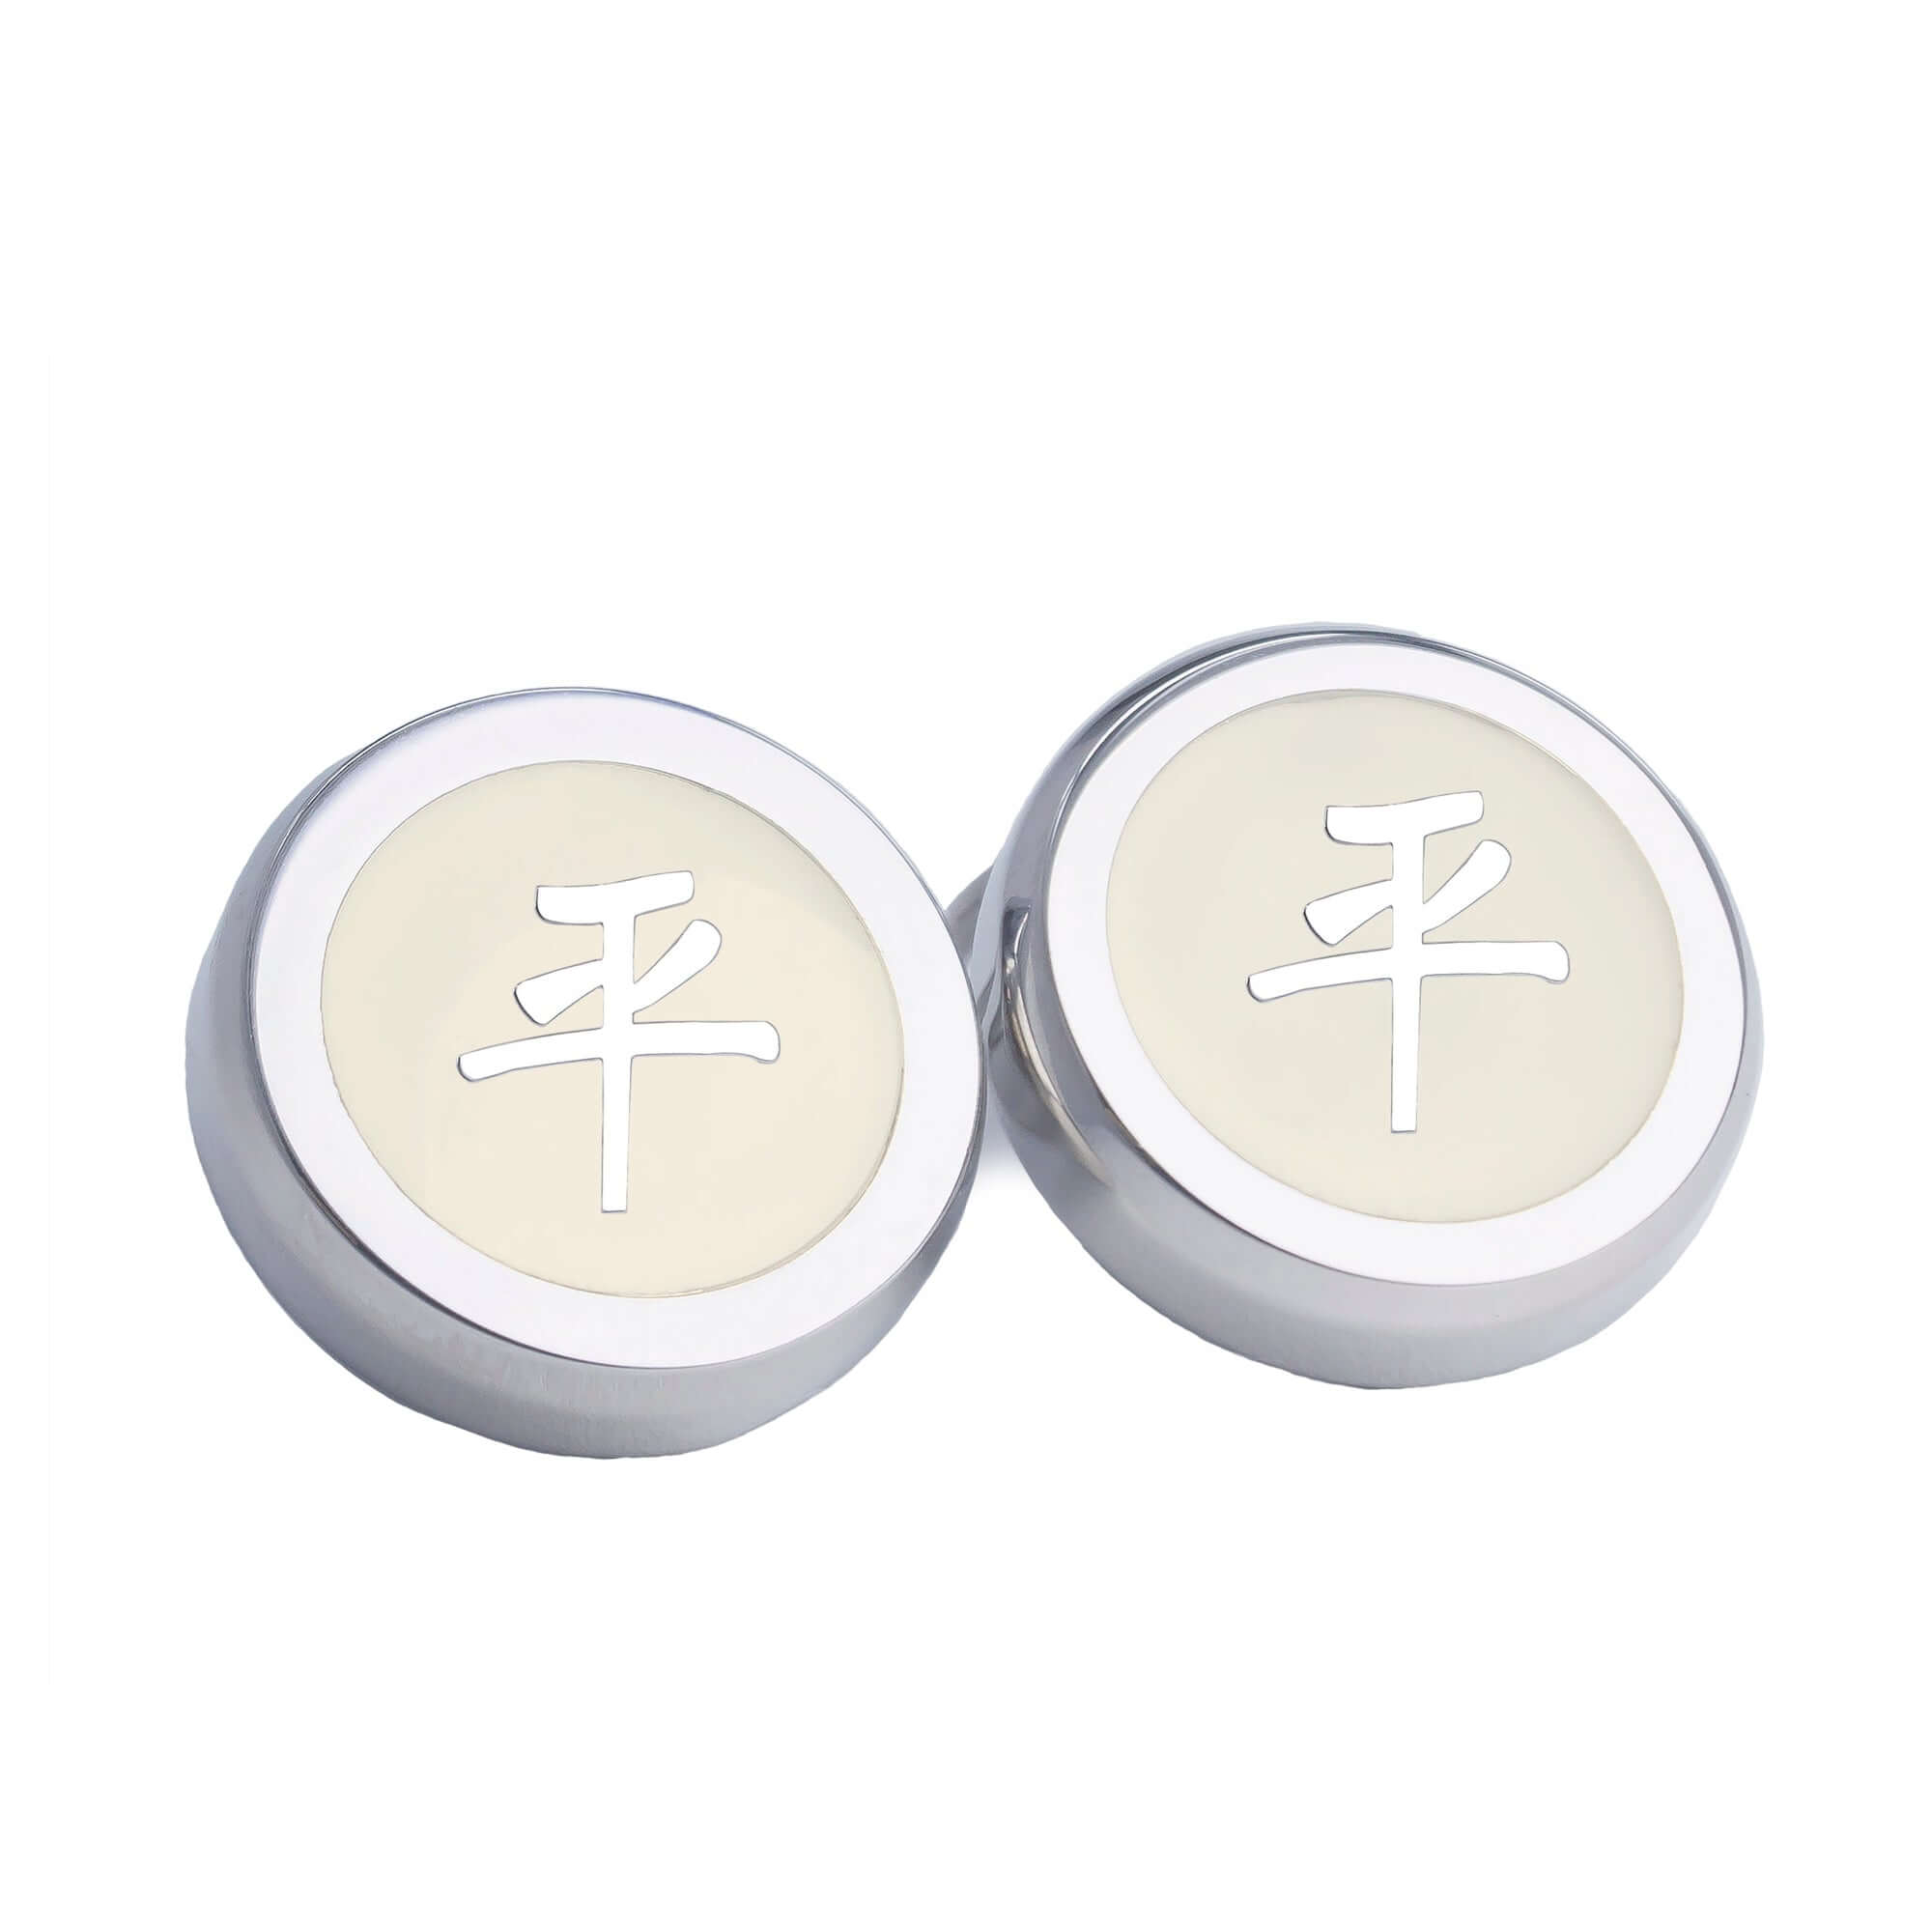 Chinese Character Silver Button Covers-Button Covers-A.Azthom-平 Ping-Cufflinks.com.sg